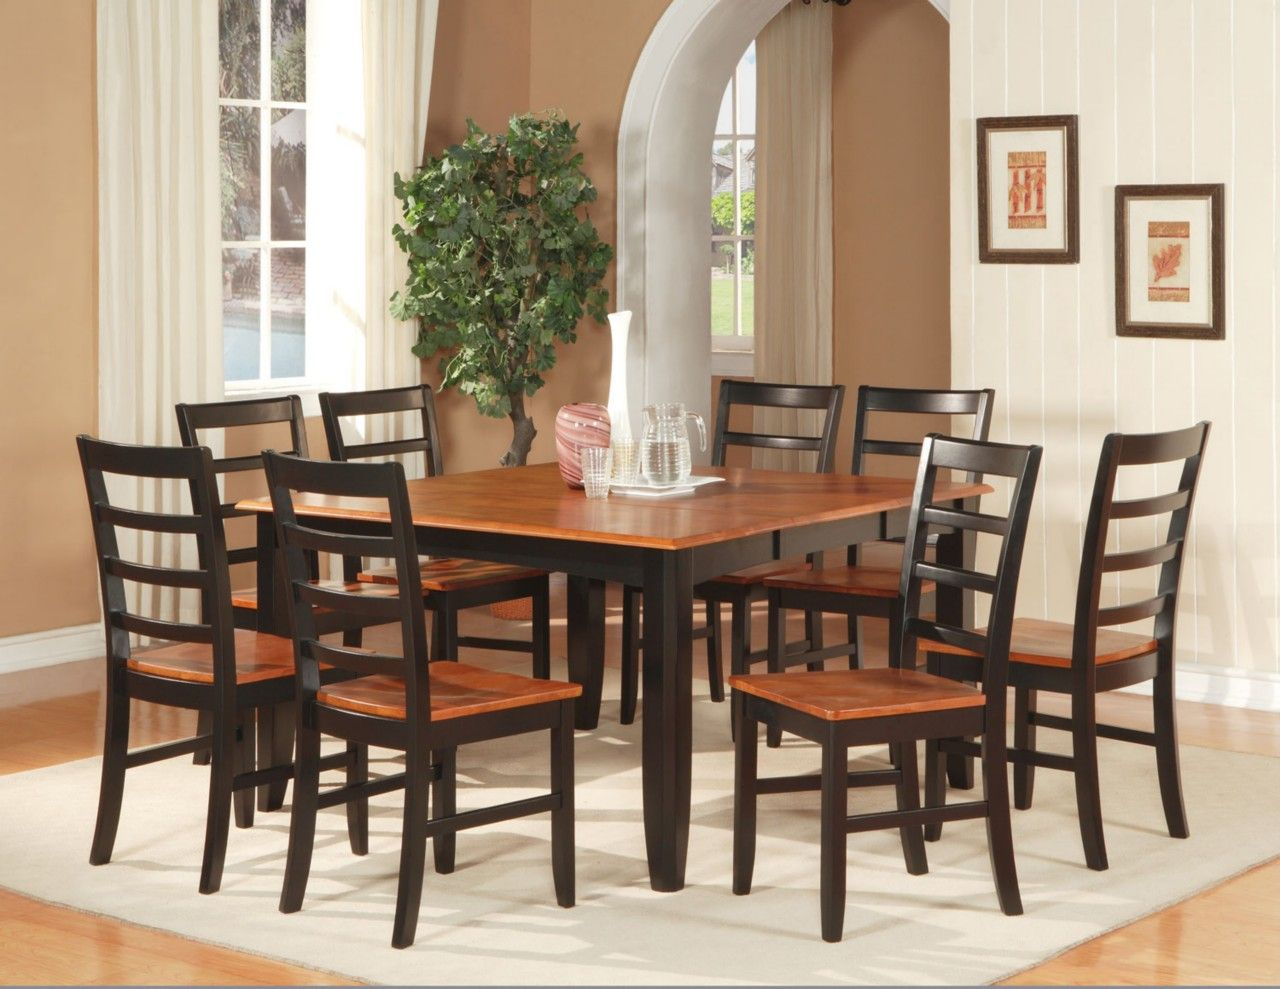 Dining Room Excellent Small Dining Room Furniture Sets With regarding size 1280 X 989